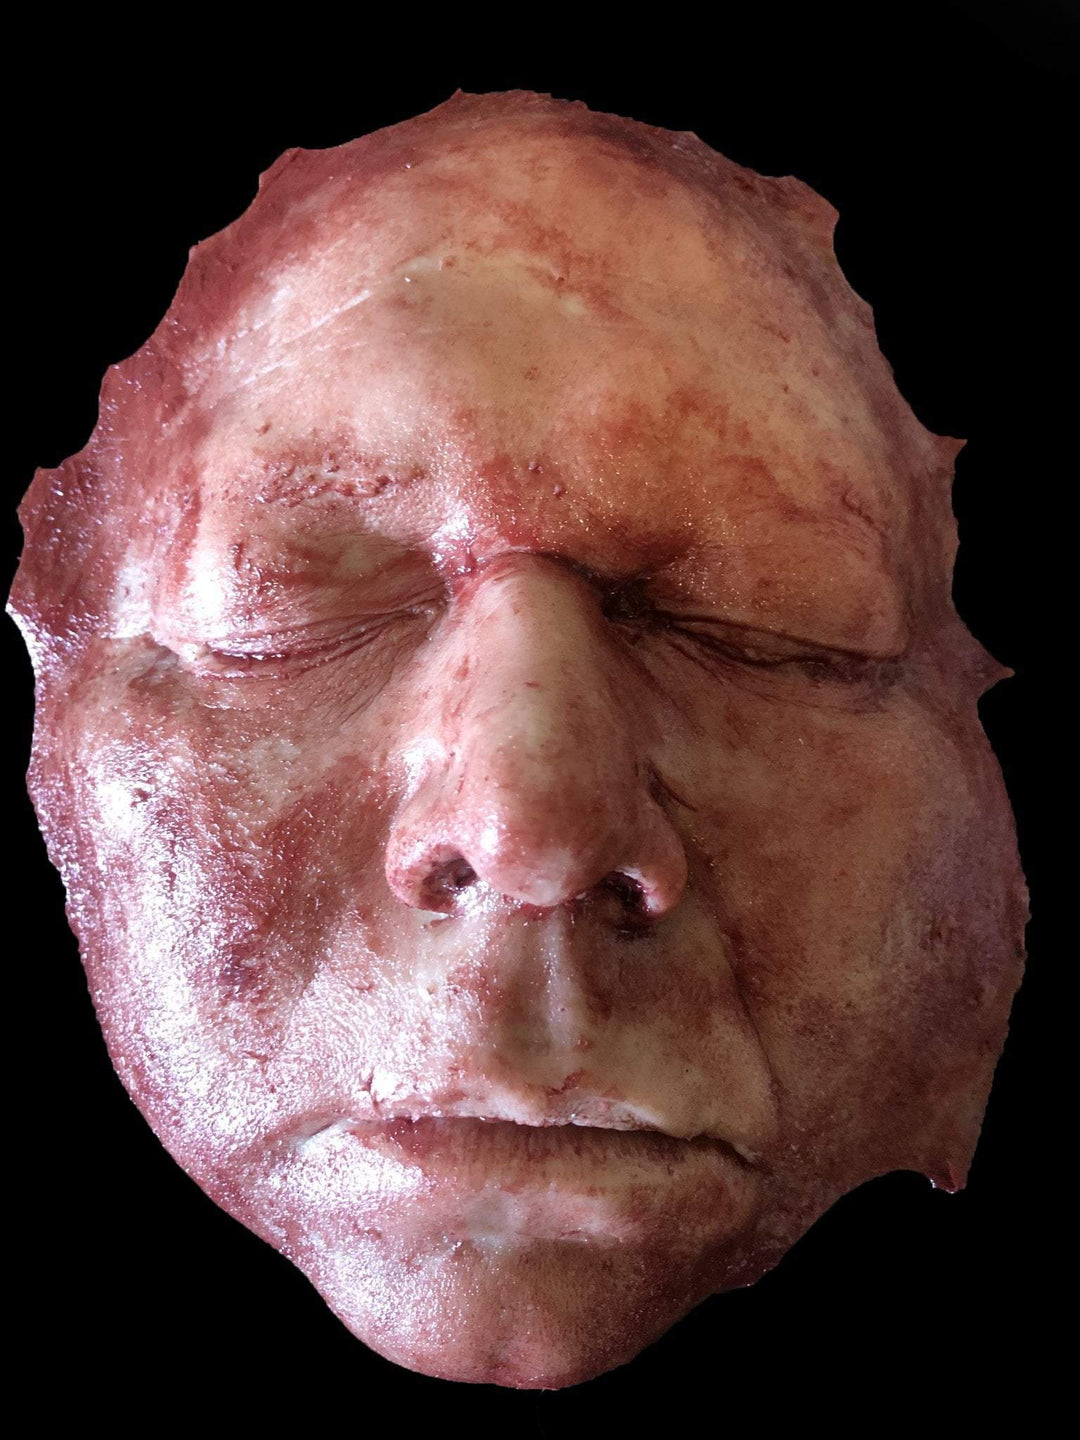 "Skinned Adult Male Face - Silicone" Human Body Part Halloween Prop